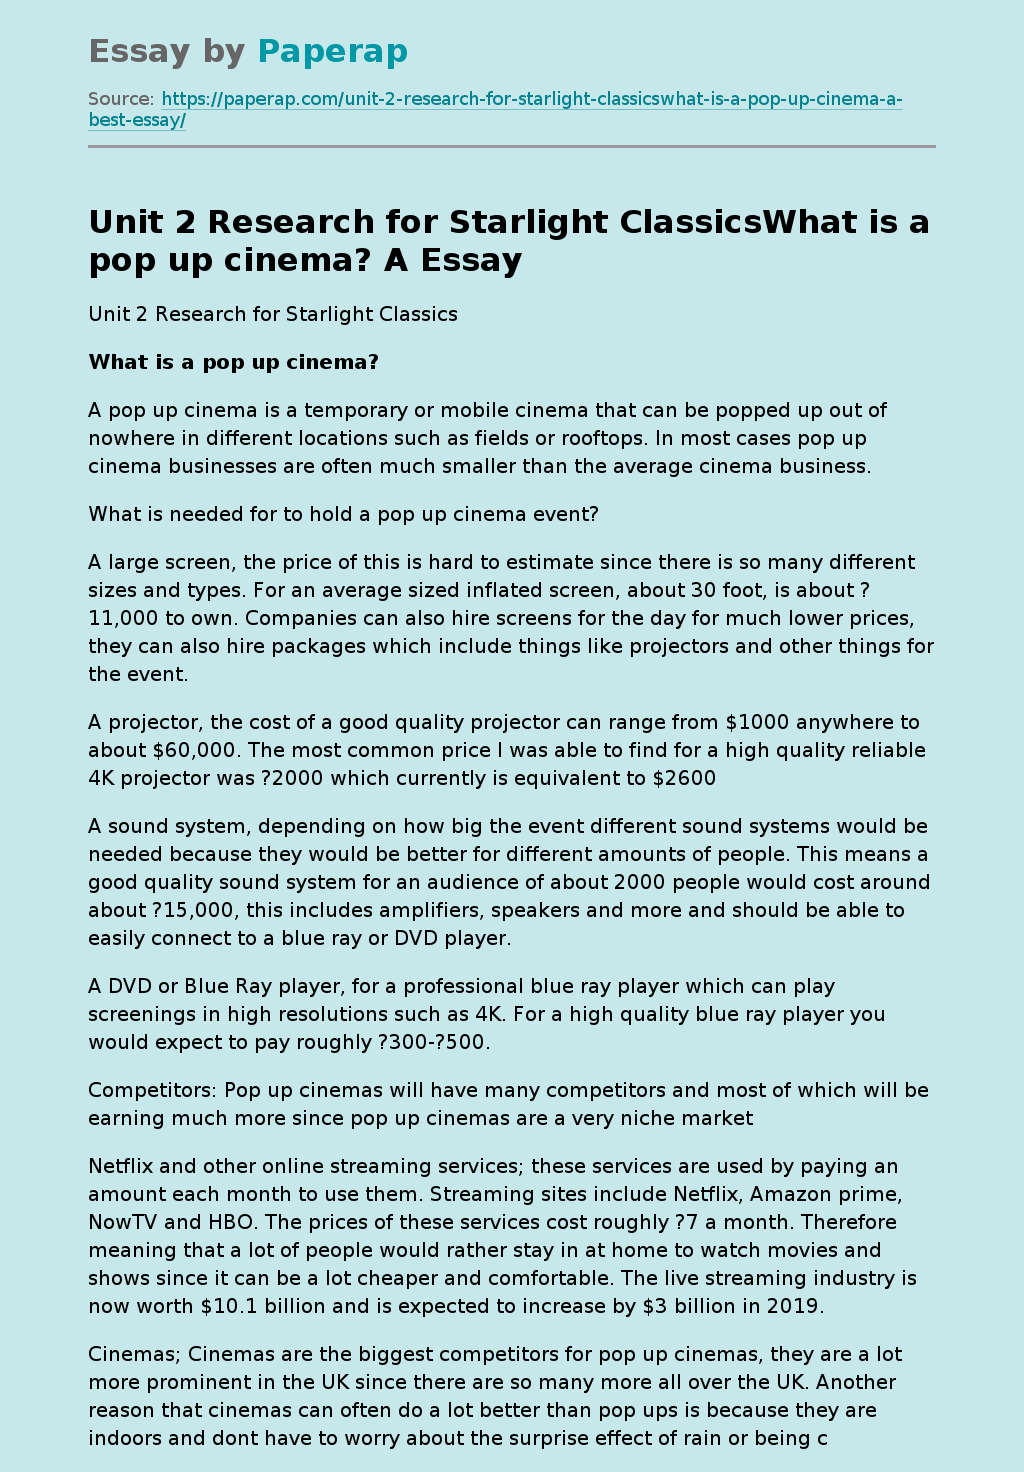 Unit 2 Research for Starlight ClassicsWhat is a pop up cinema? A